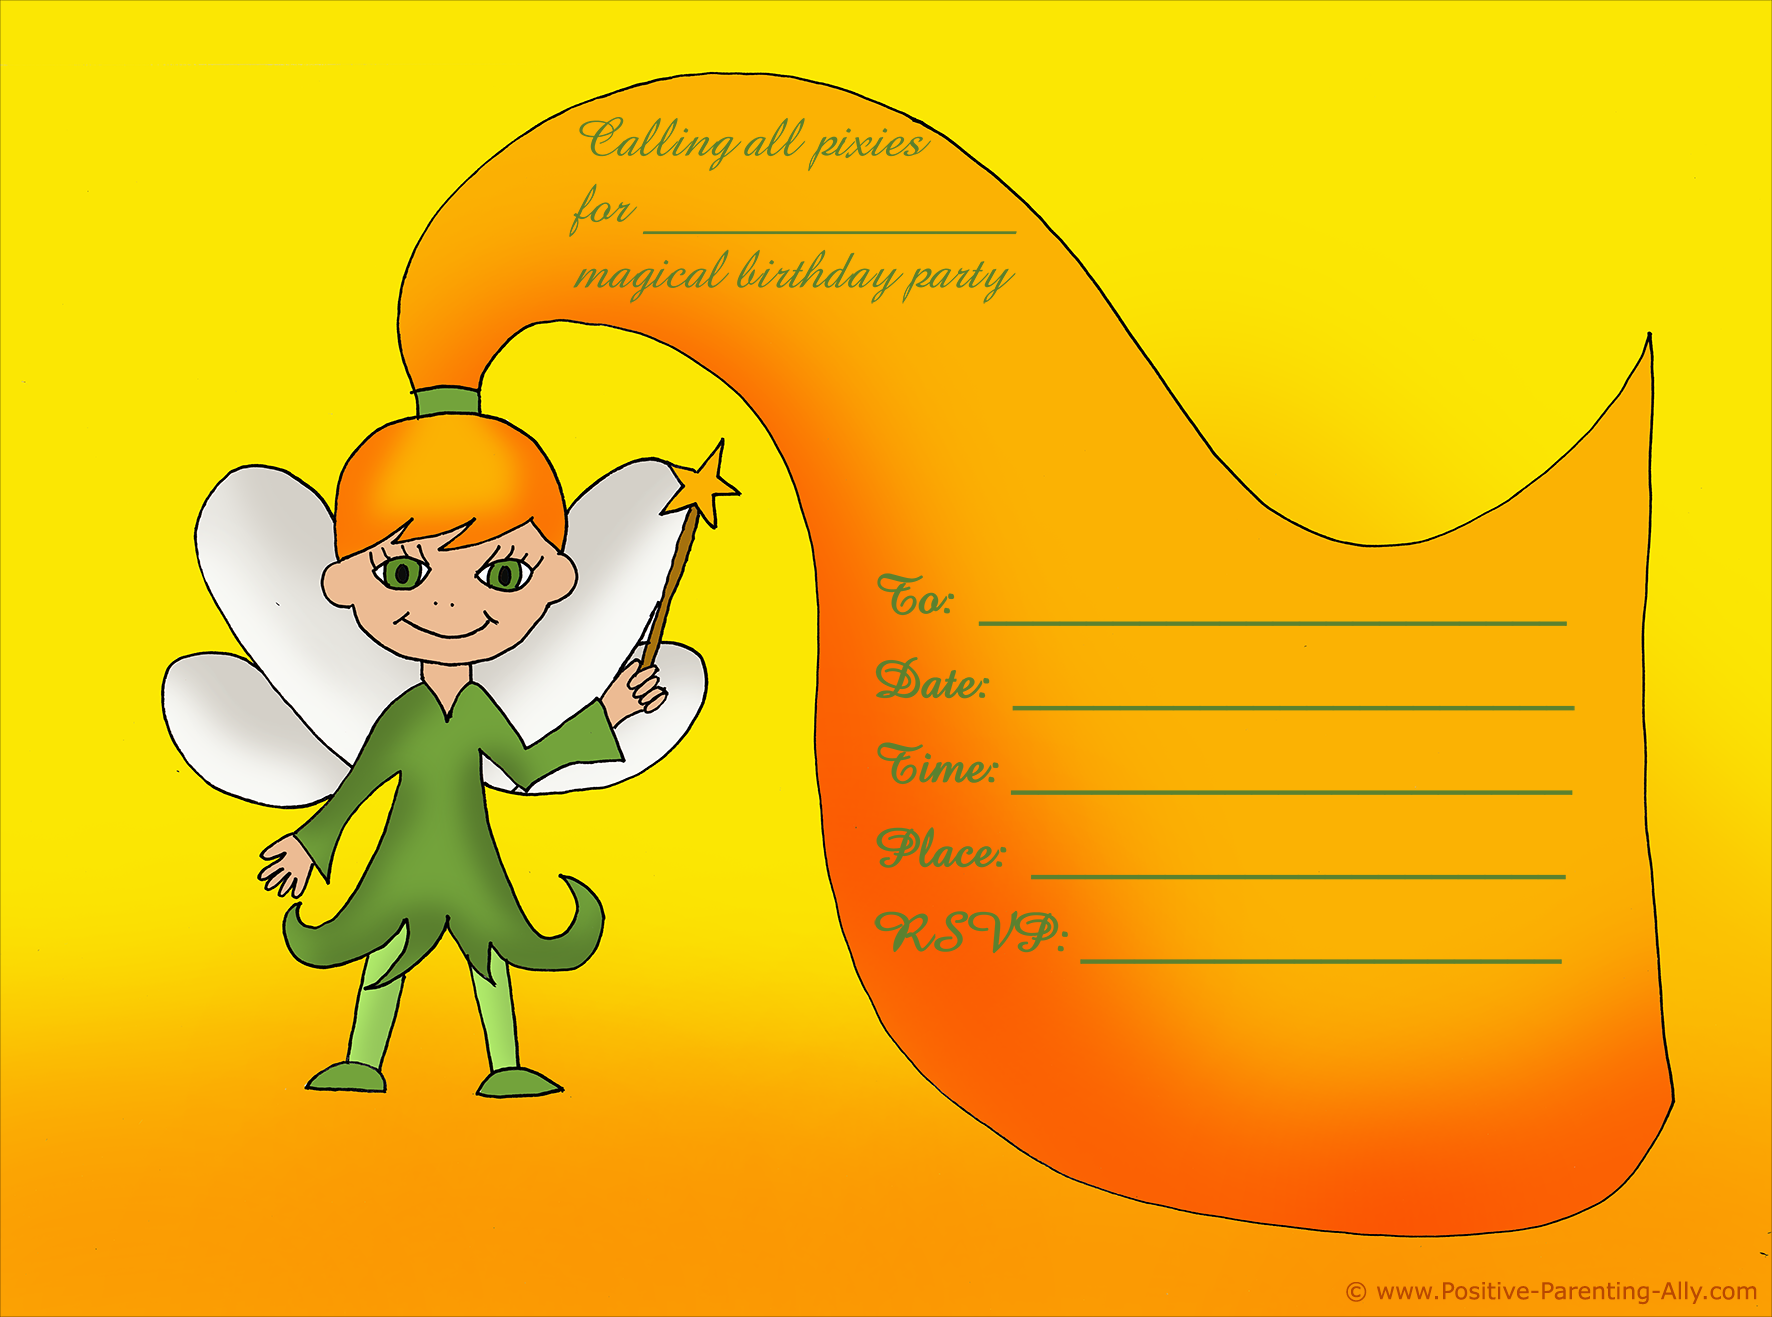 Fairy or pixie birthday invite to print for girls.